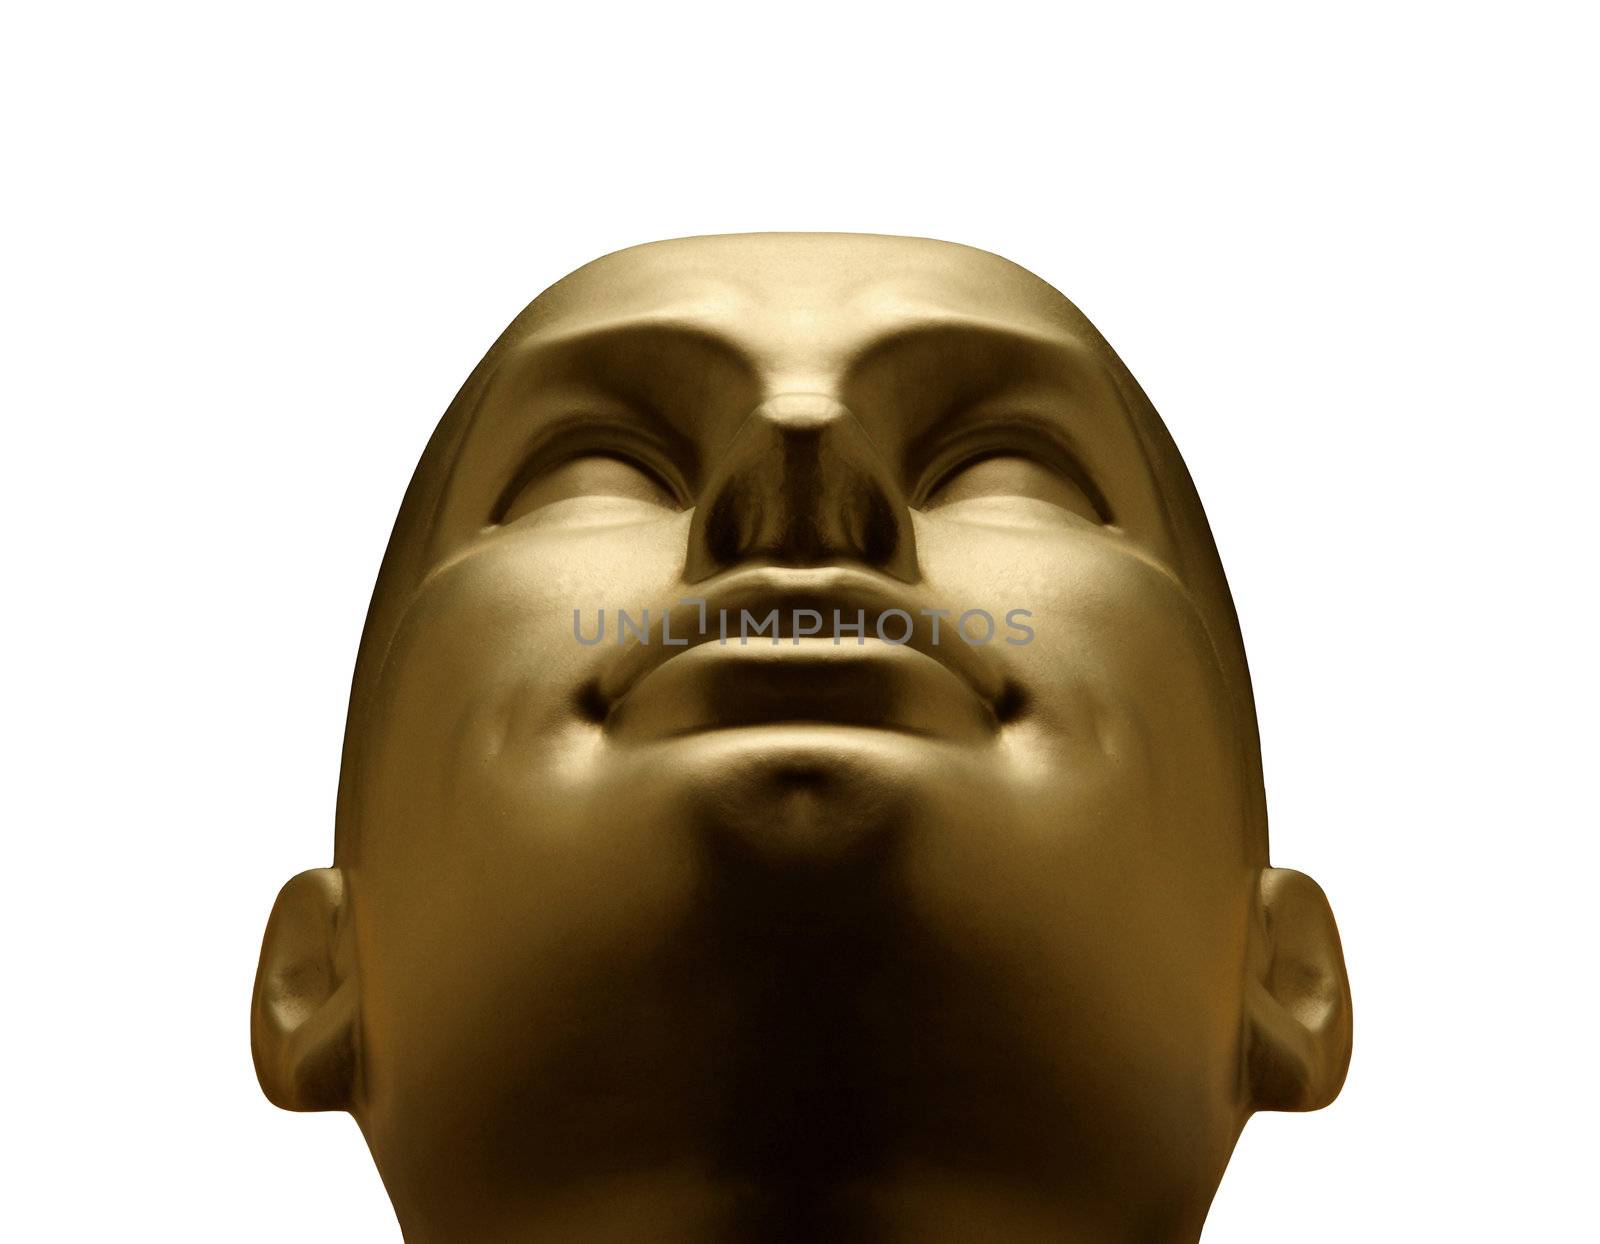 Gold mannequin head looking up against white background